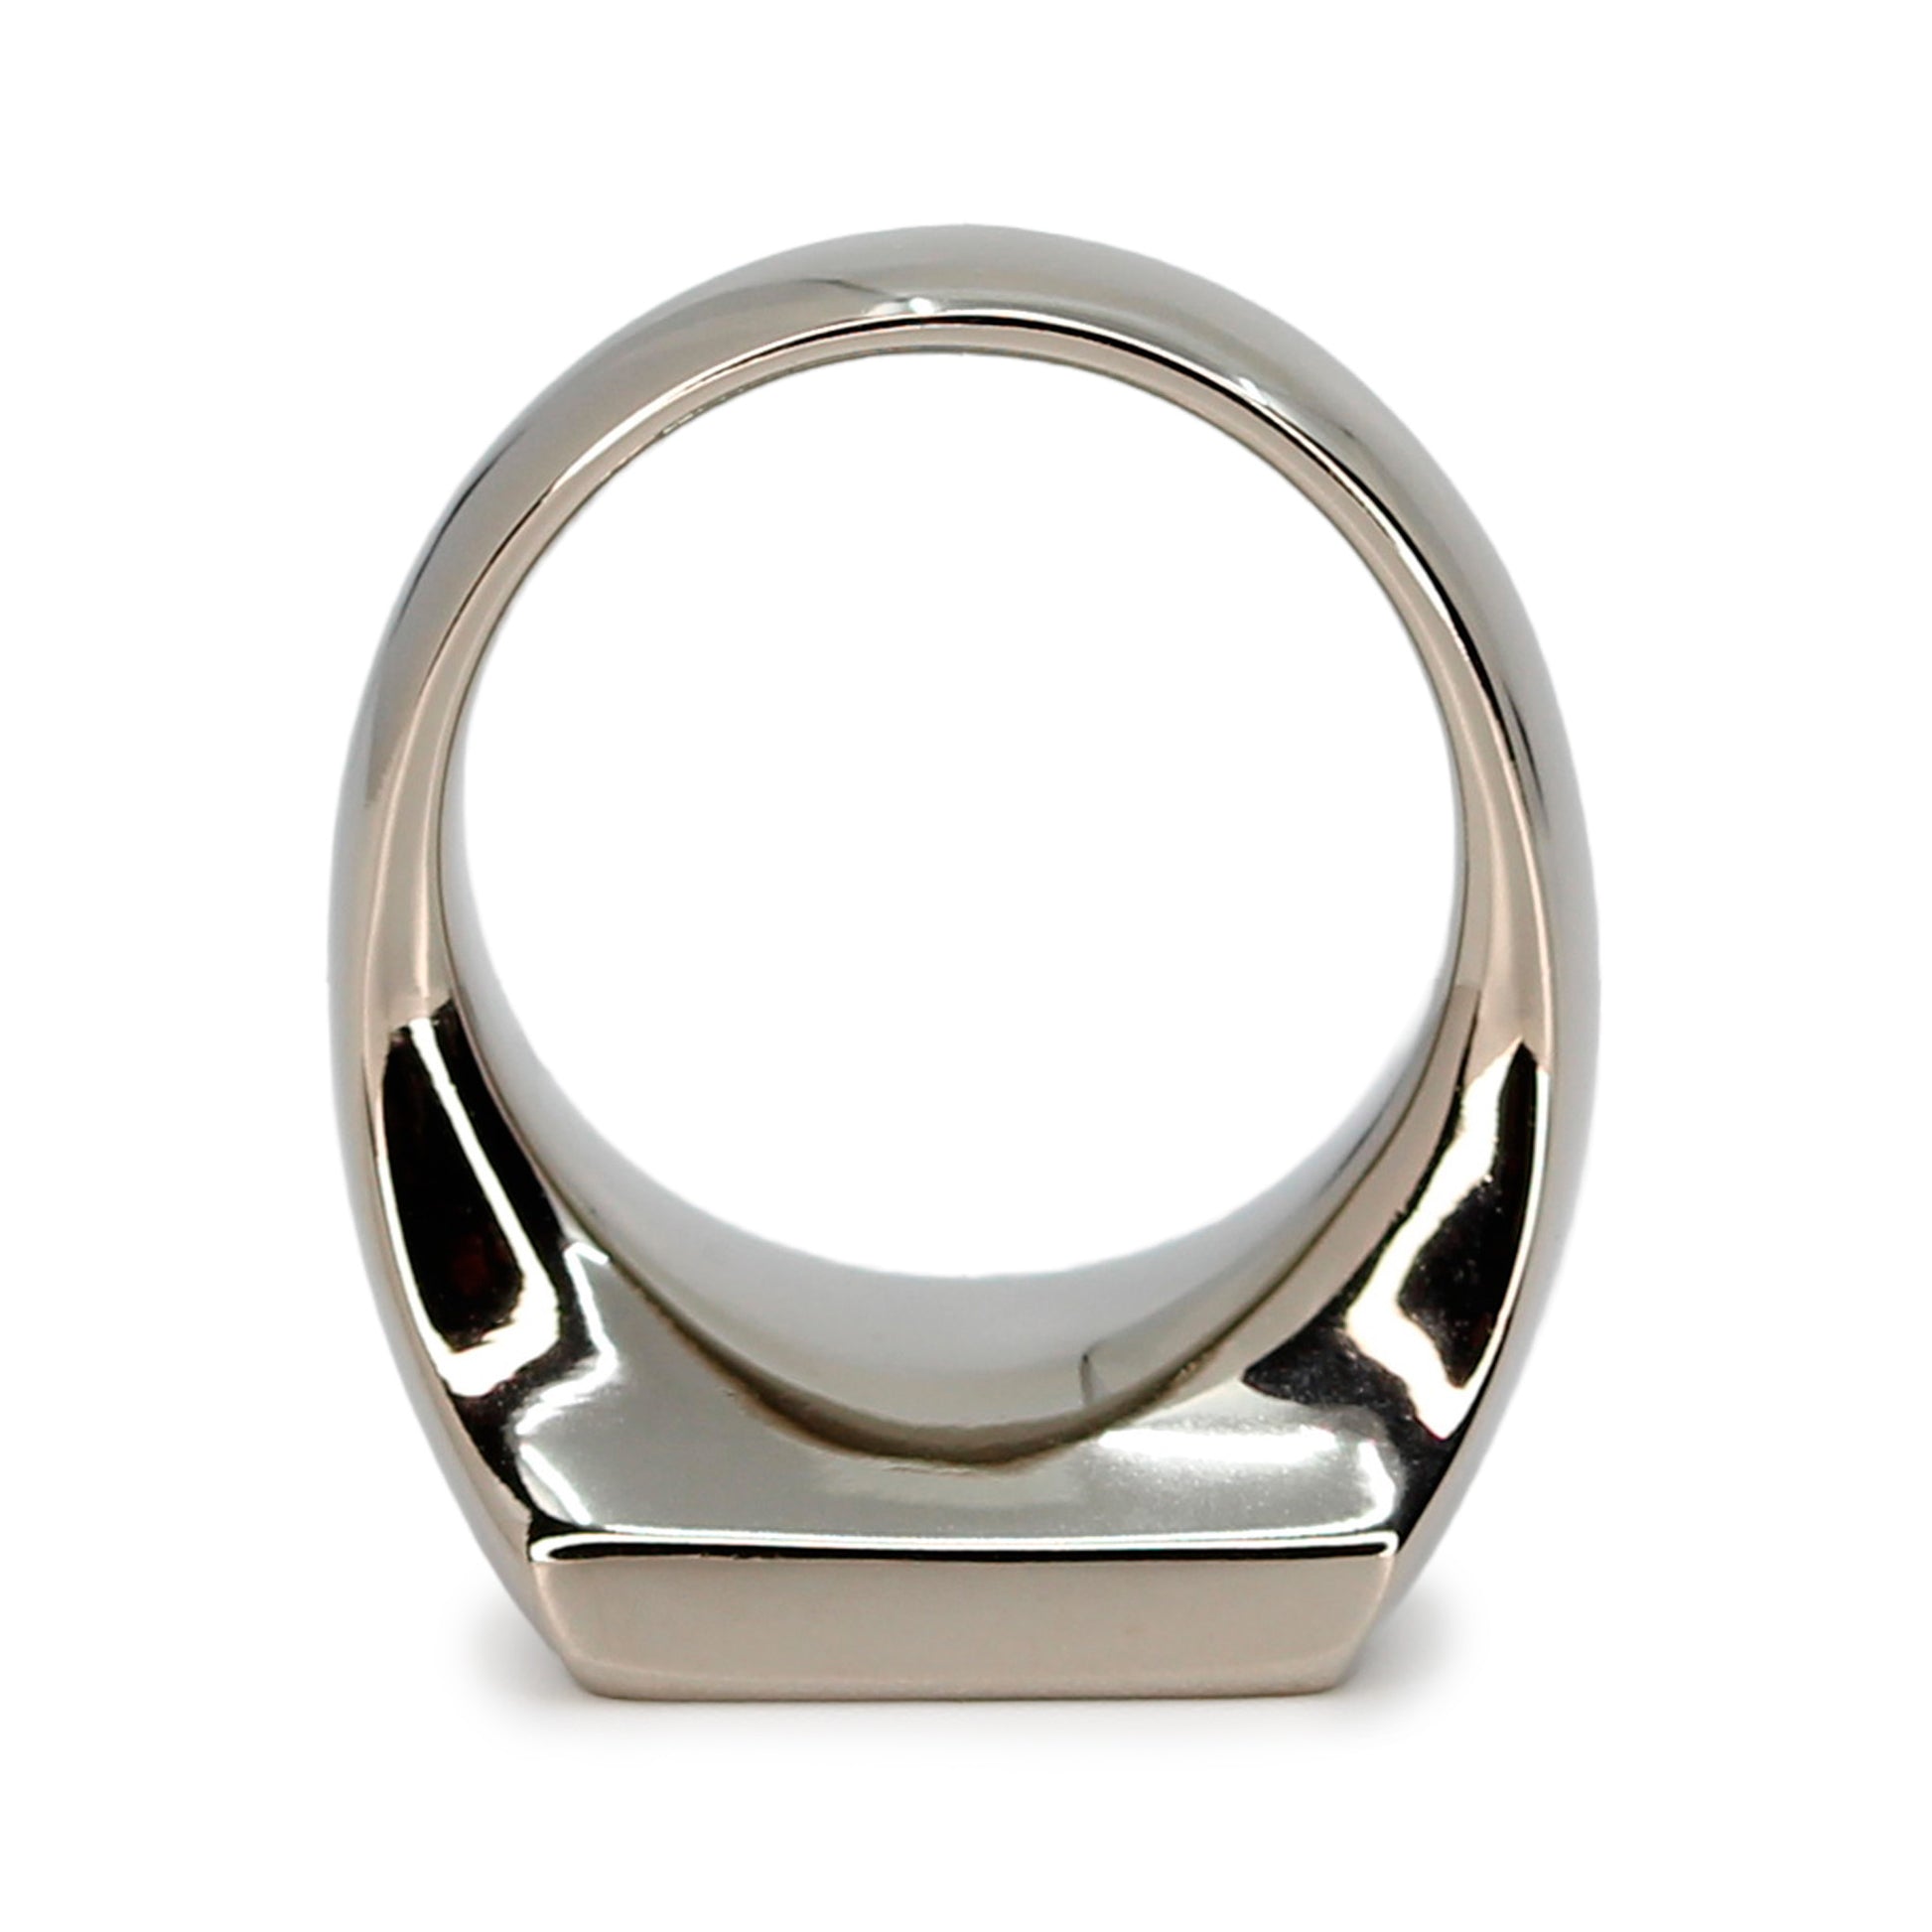 Single silver-colored titanium signet ring, 15x15 mm wide surface with an engraved shark fin. Image shows view of the ring facing down.